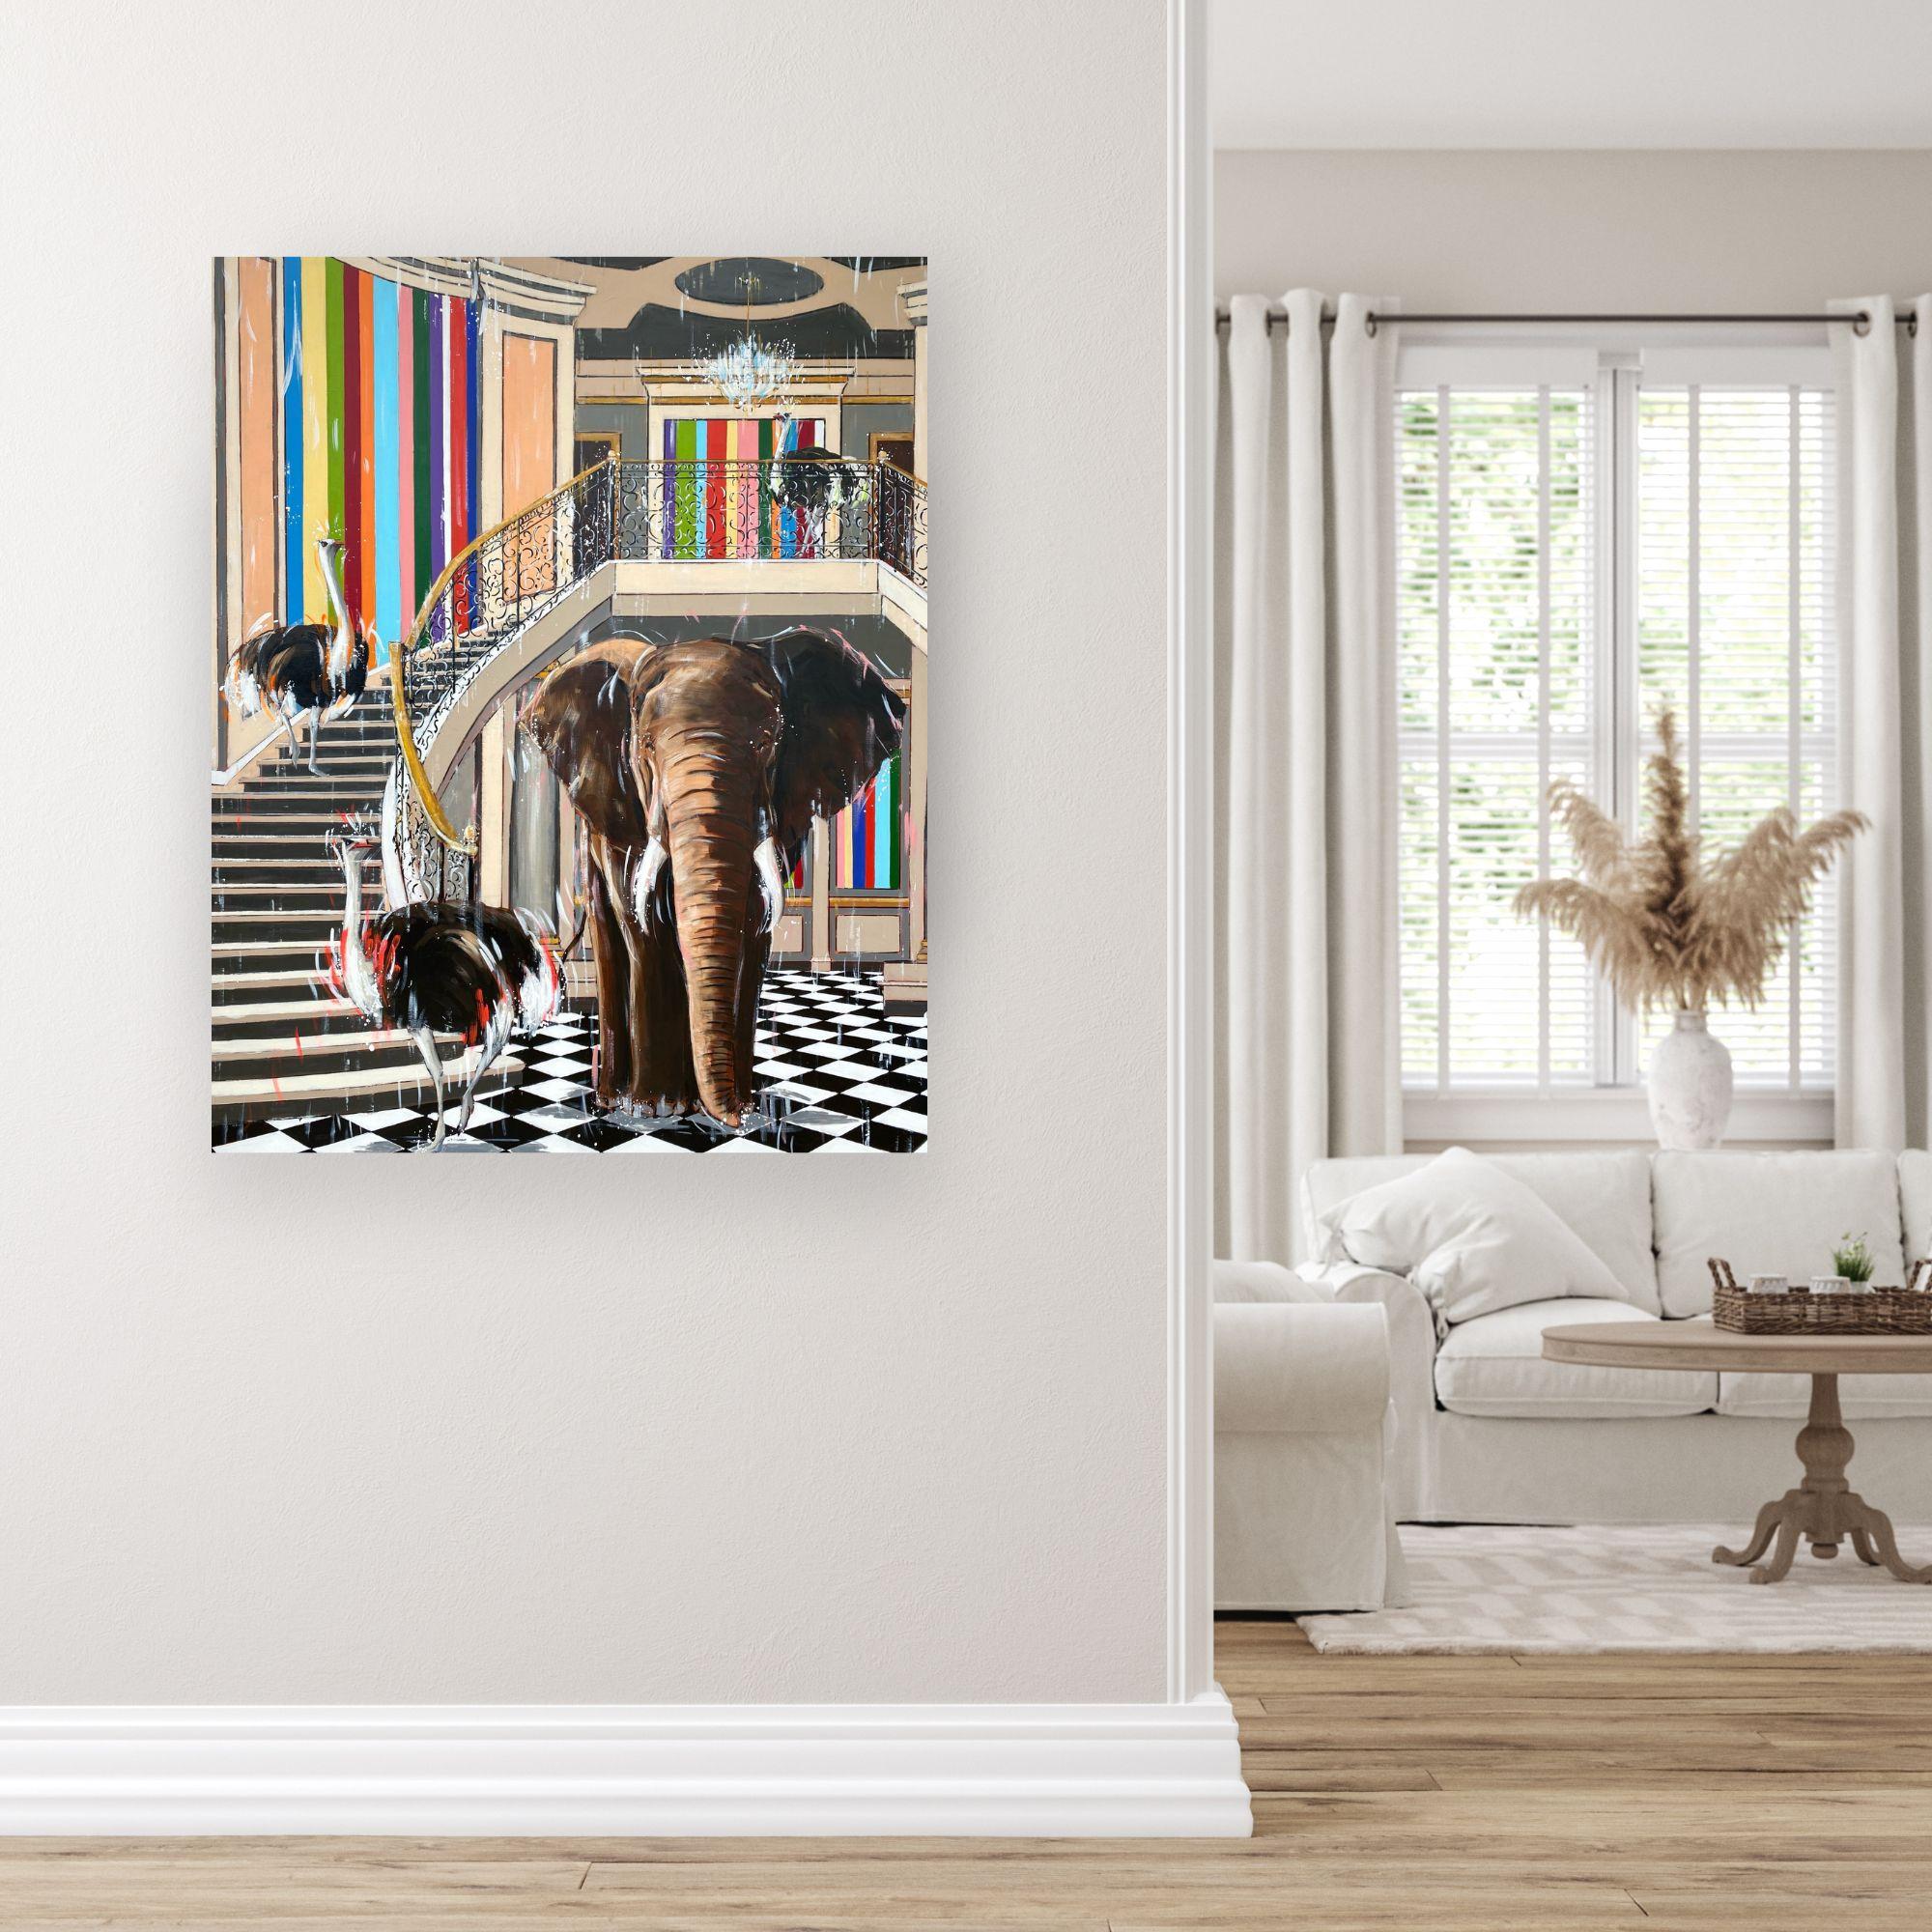 Serenisima-original wildlife surreal interior abstract painting-contemporary art For Sale 1